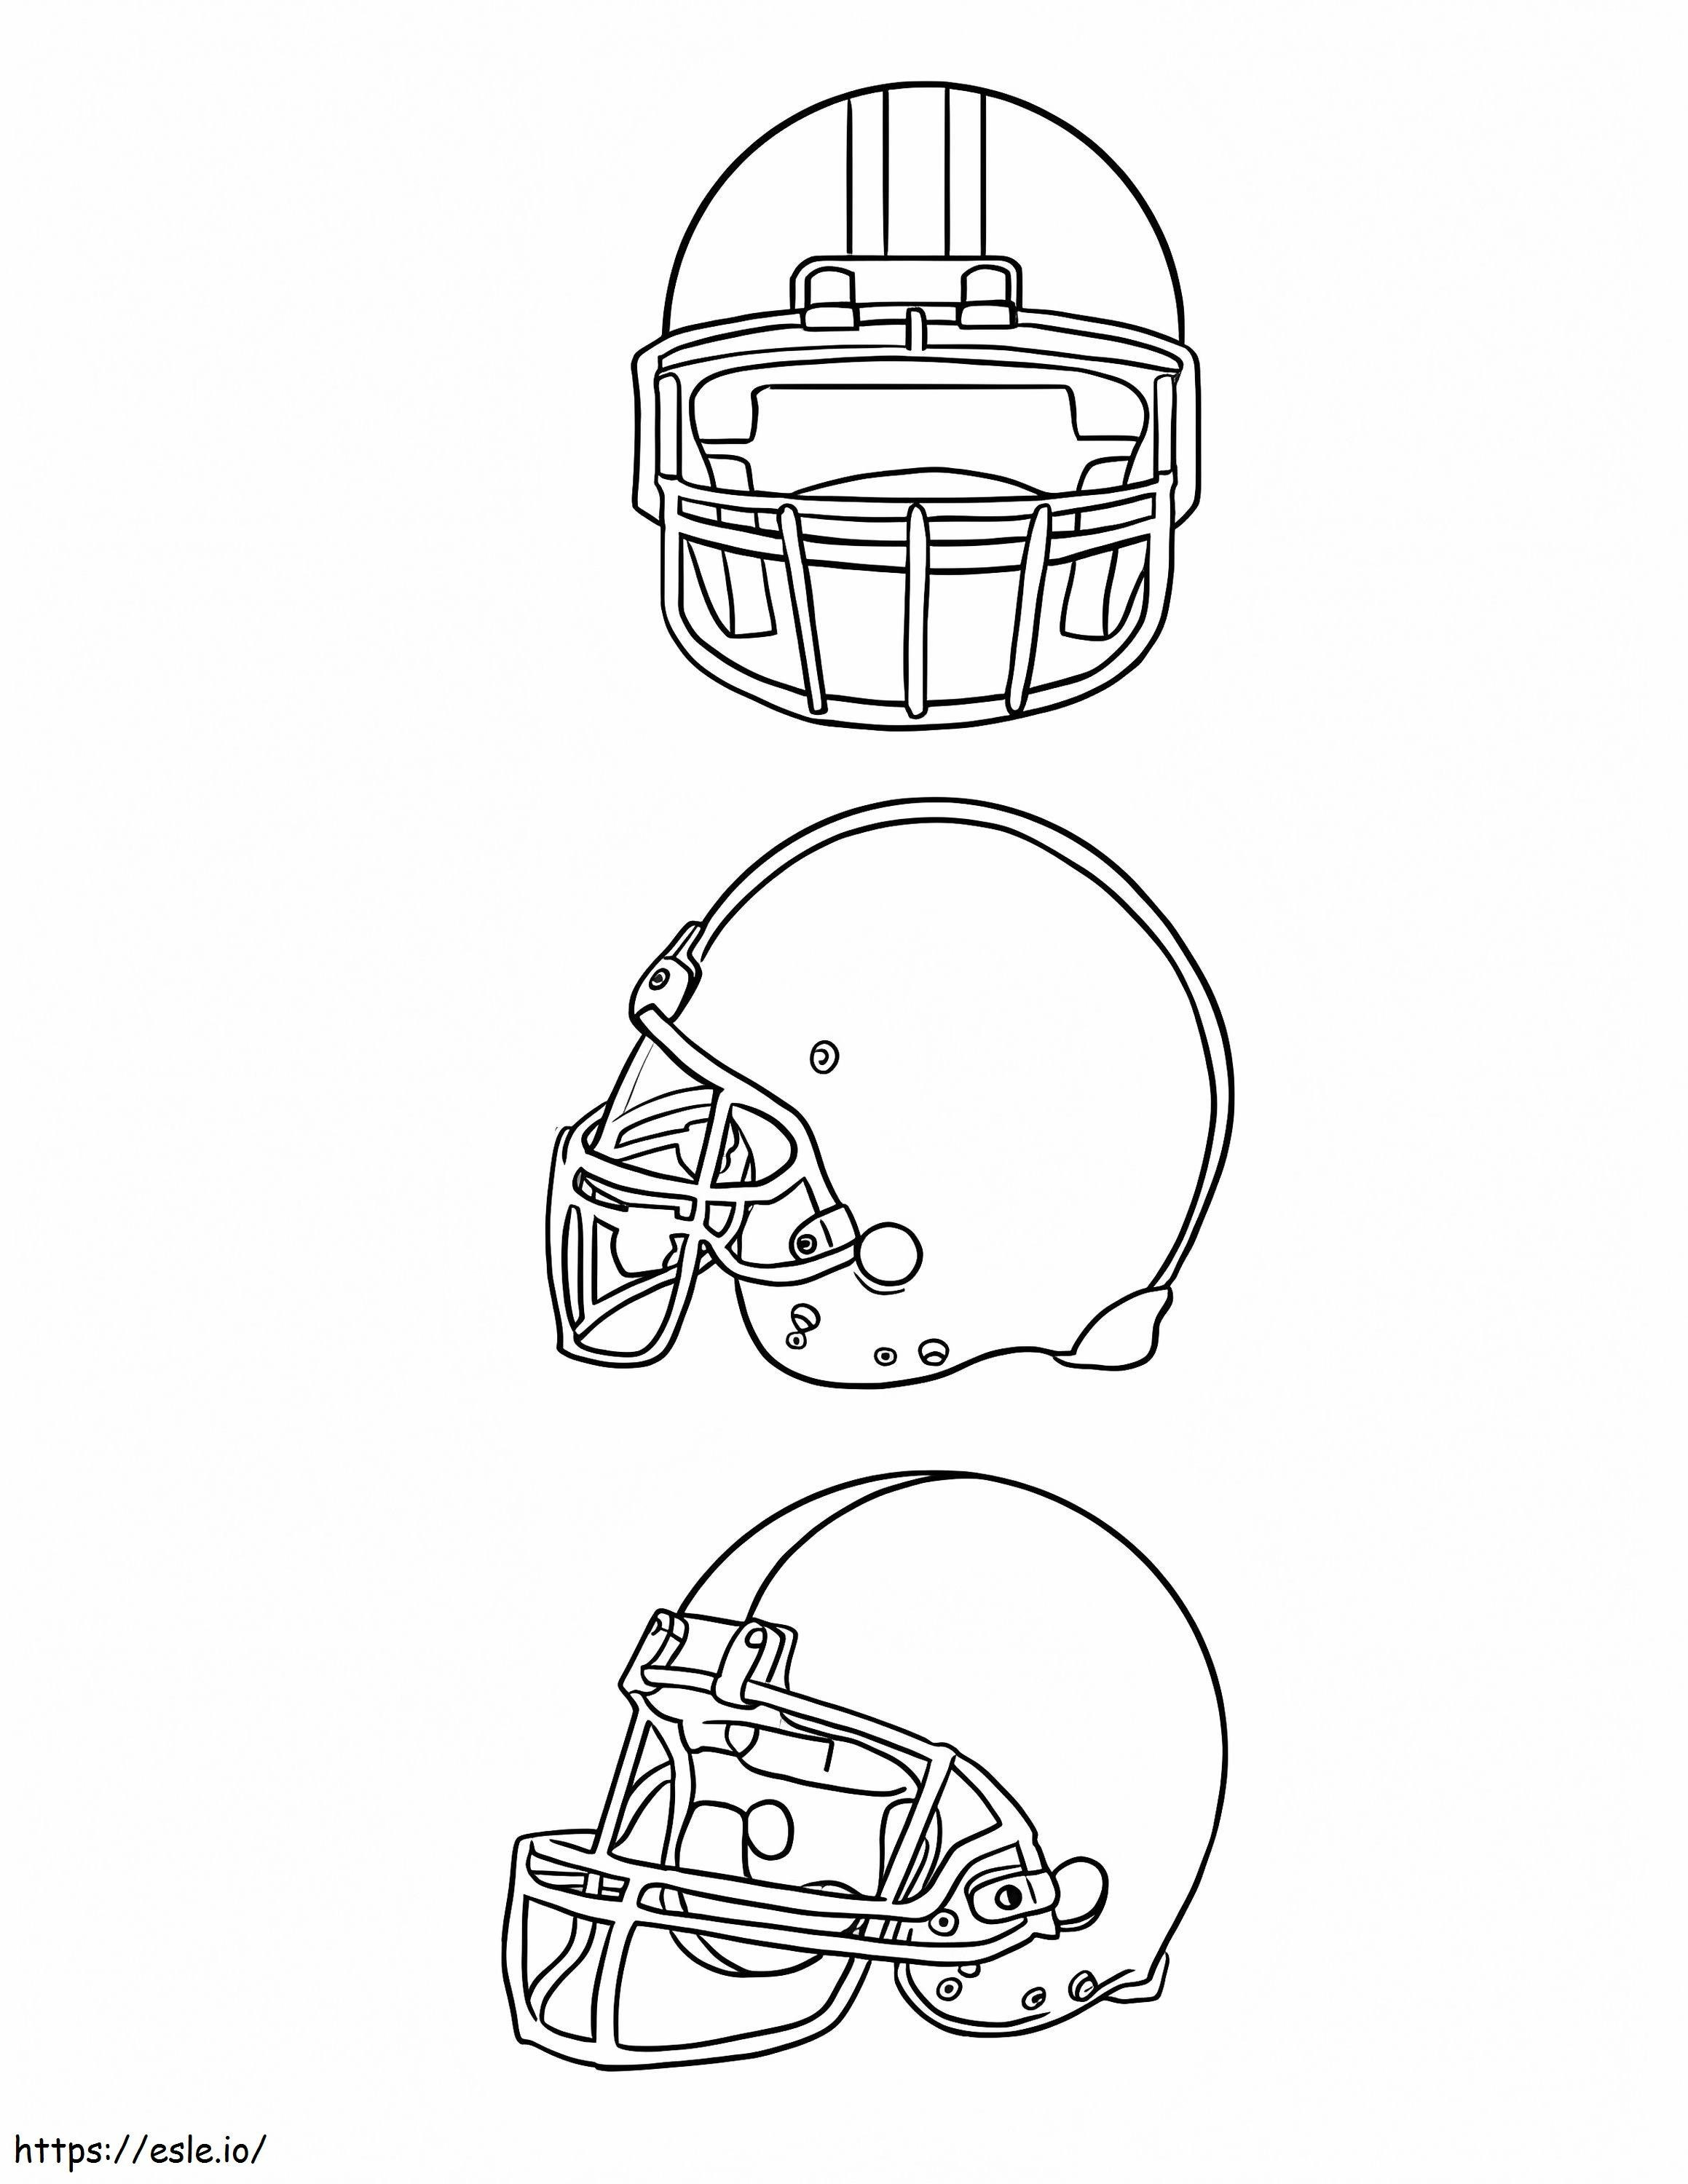 Football Helmets coloring page